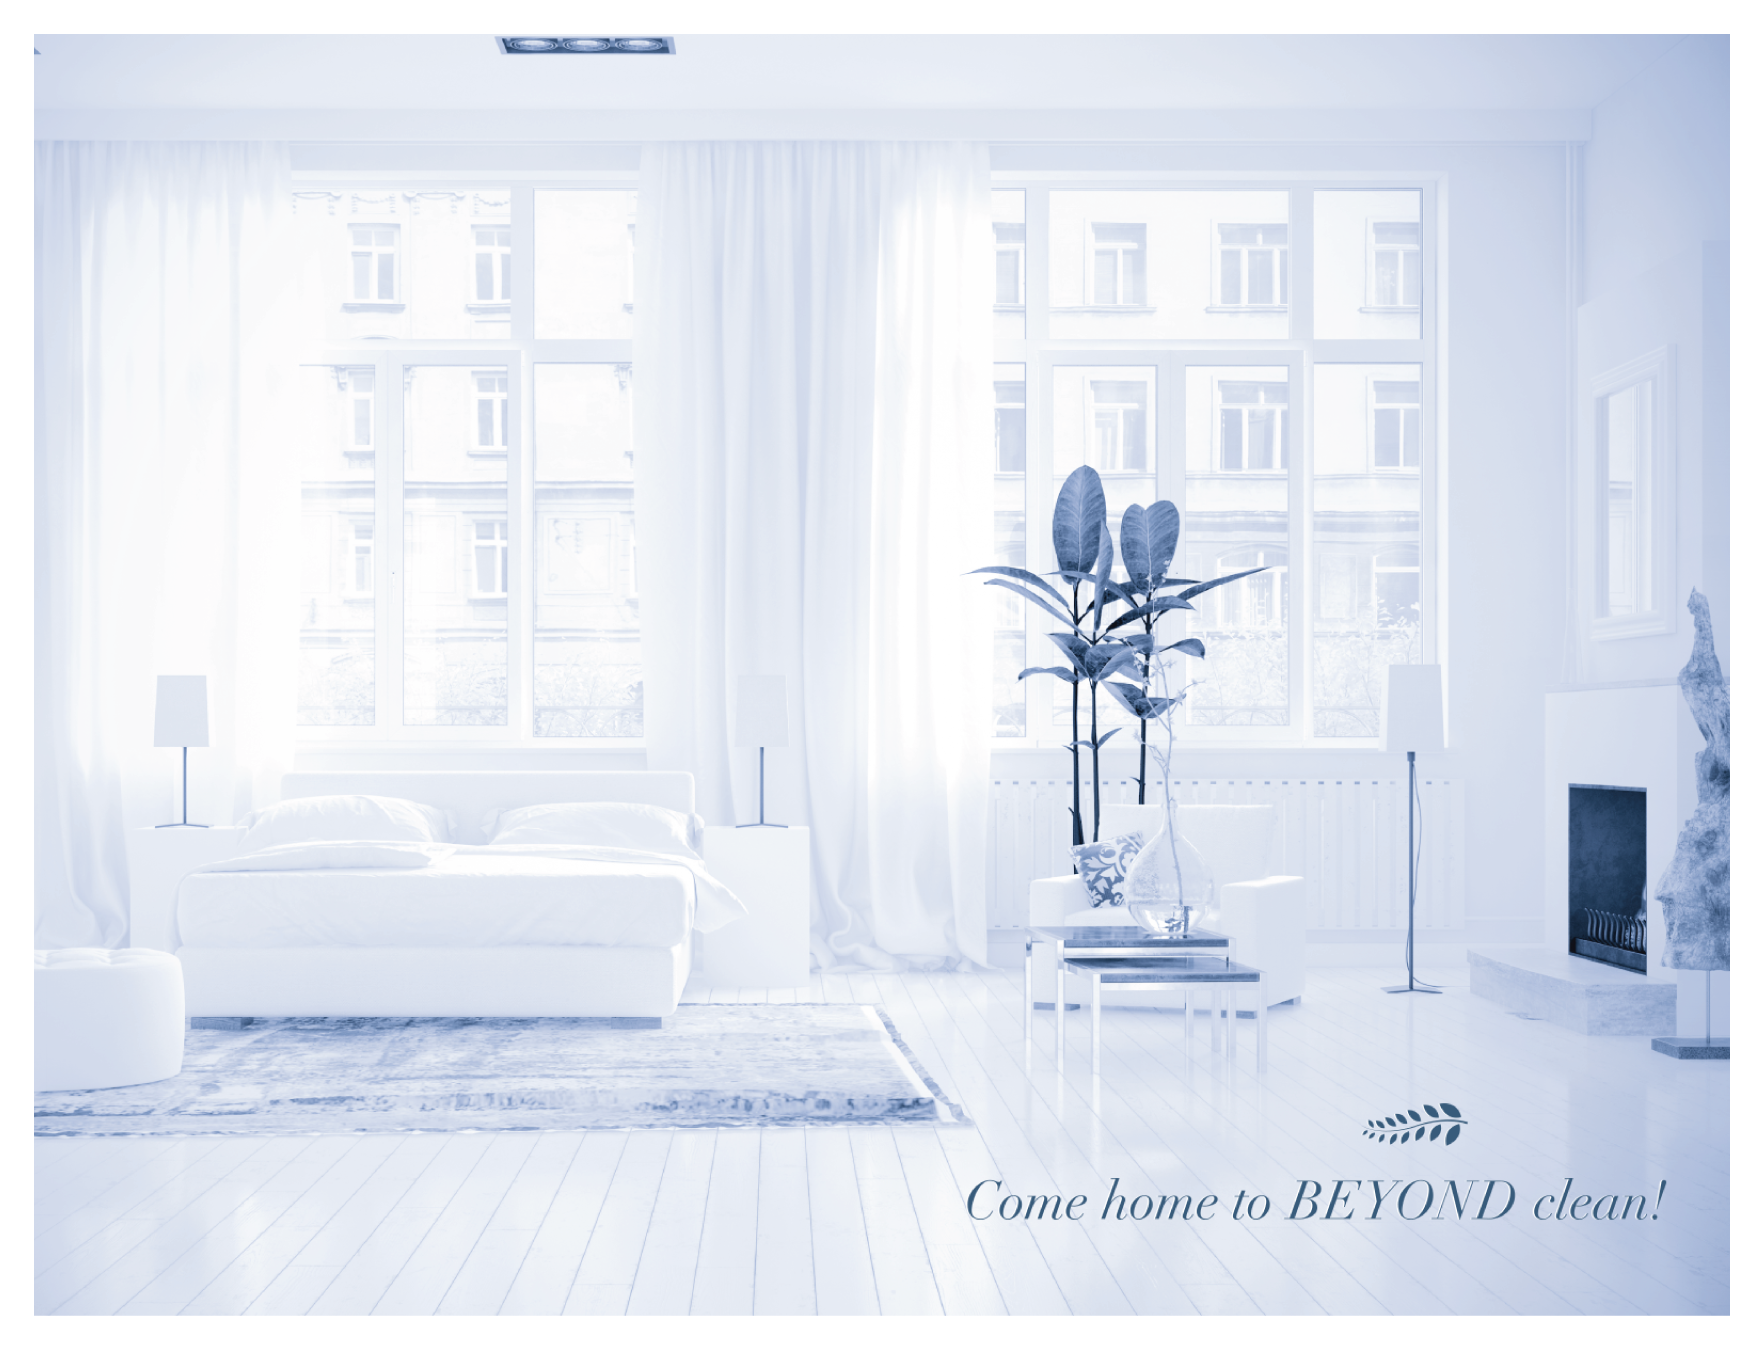 Beyond – Cleaning & Concierge